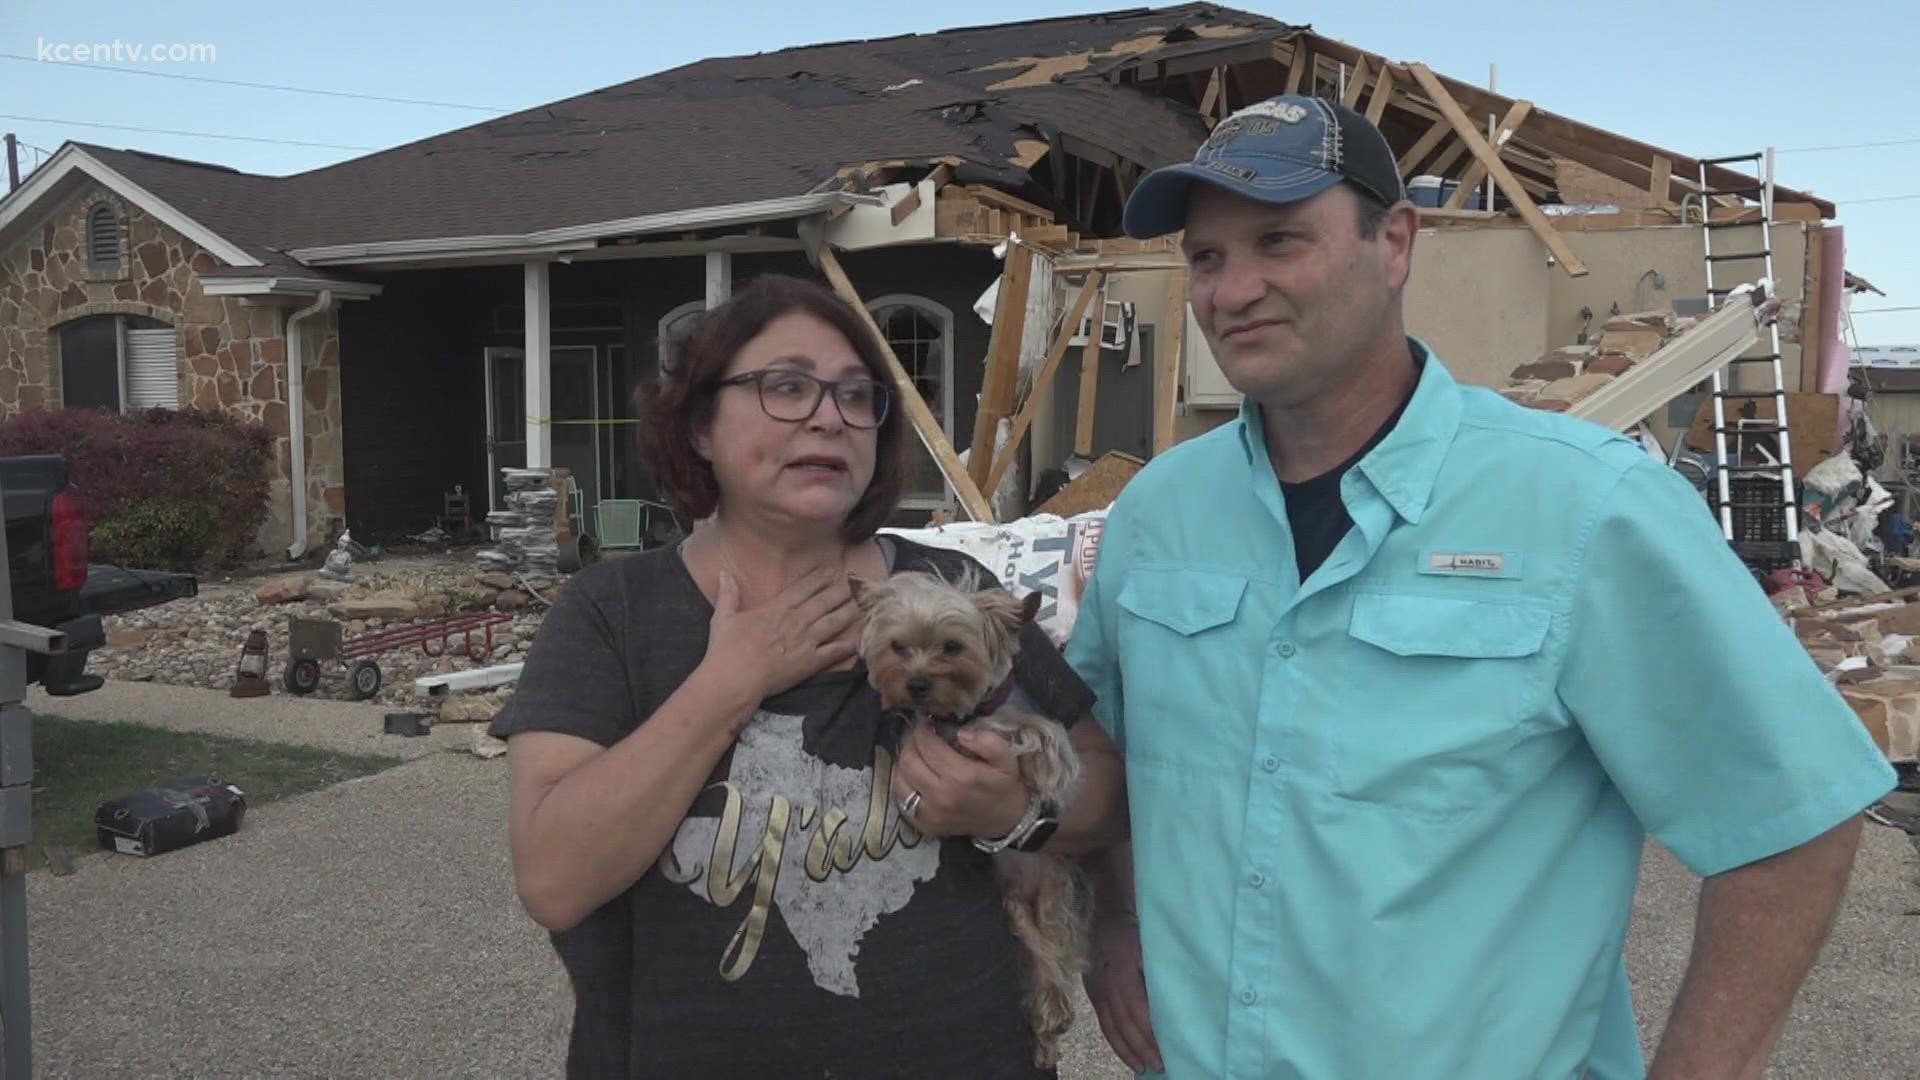 "My neighbor called me and she said our house is gone, " said Debbie Livengood.